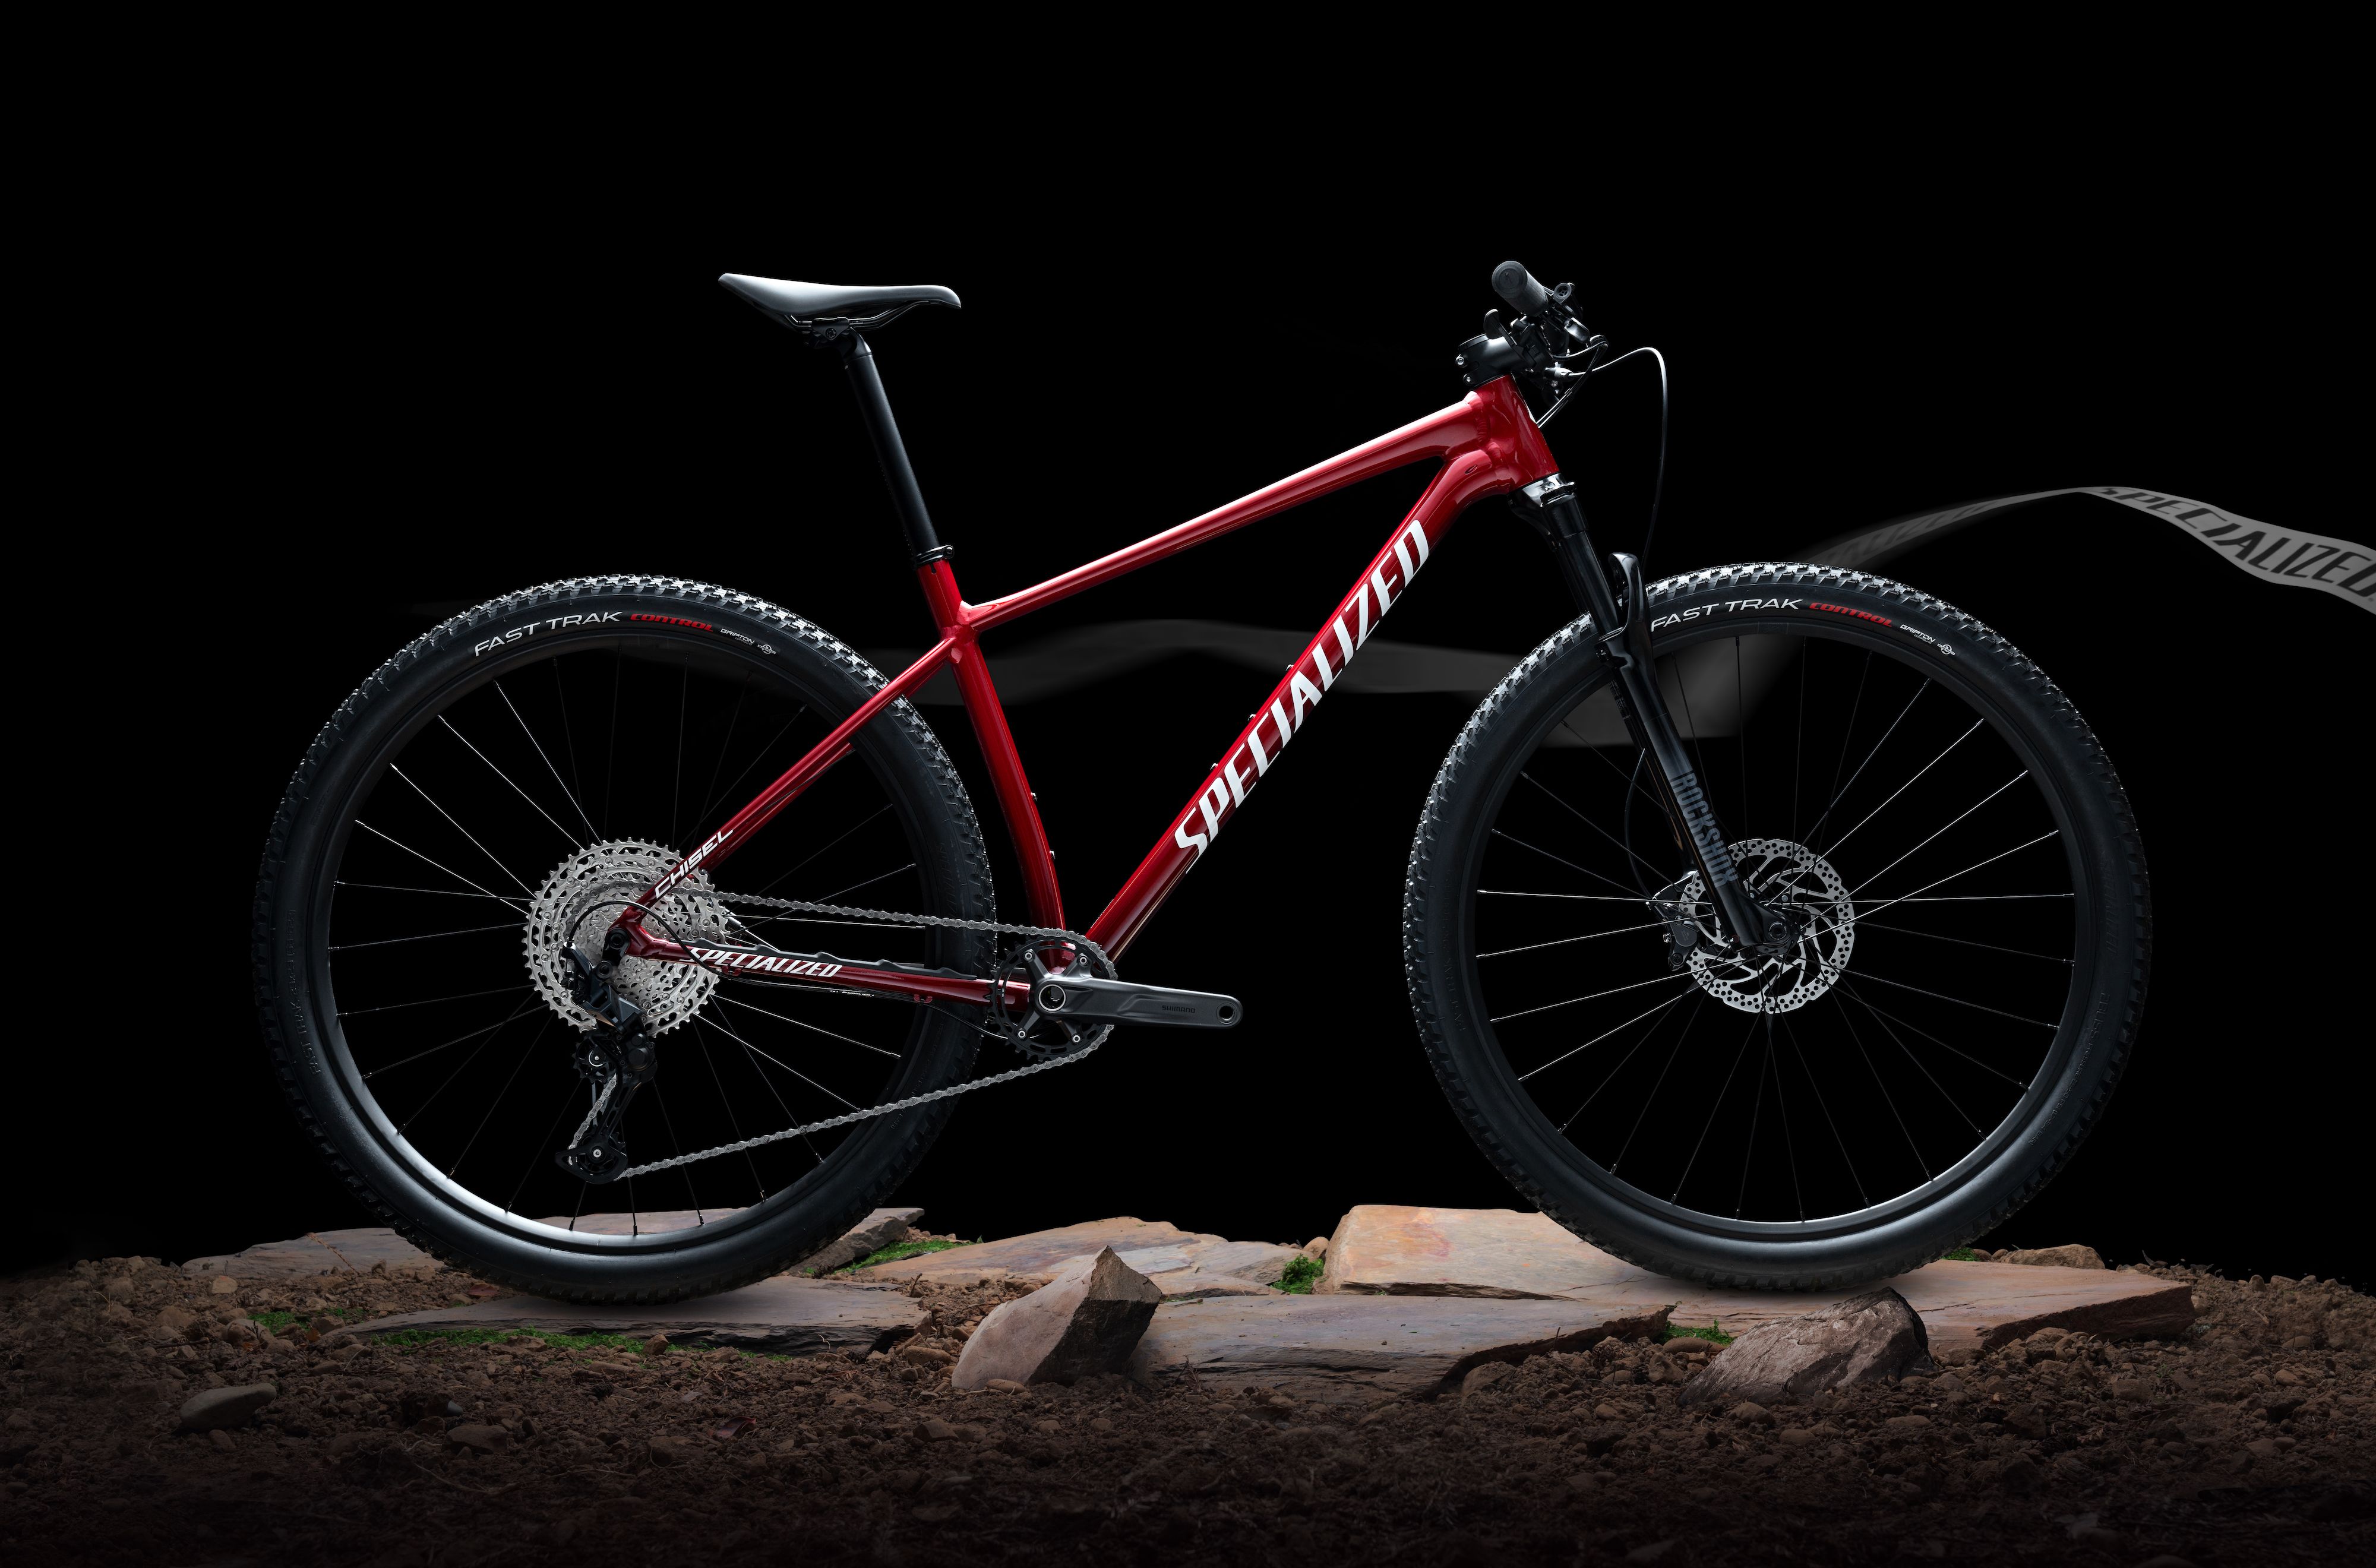 Specialized presenteert Chisel hardtail - Bicycling